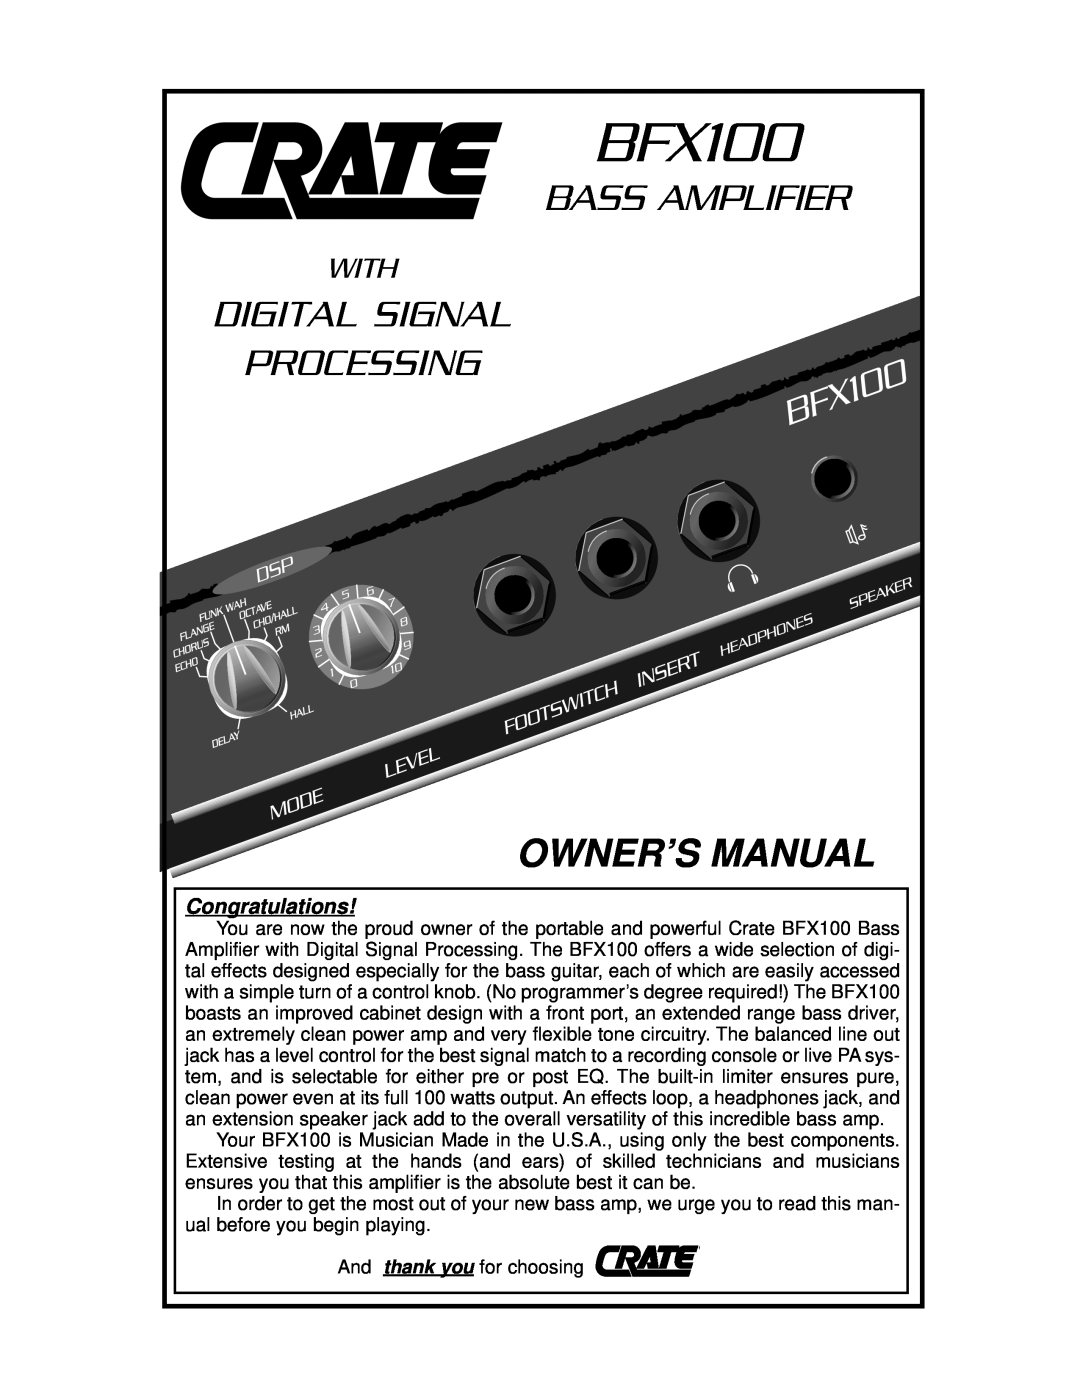 Crate Amplifiers BFX100 owner manual Congratulations, Bass Amplifier, Digital Signal Processing, With 